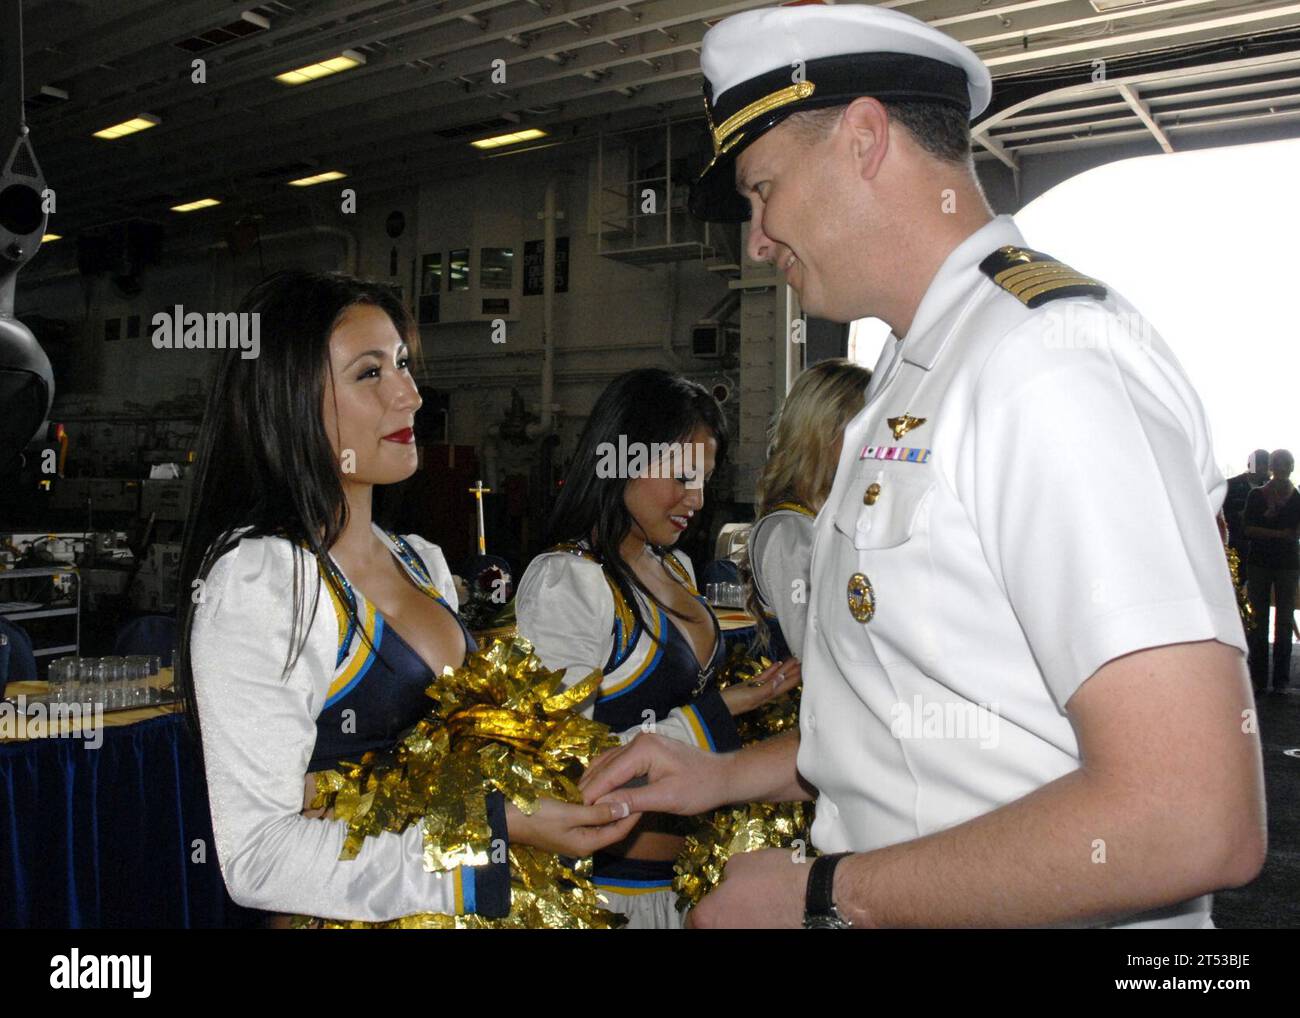 Boxer, Chargers cheerleaders, cheerleaders, LHD, LHD 4, LHD-4, Stock Photo